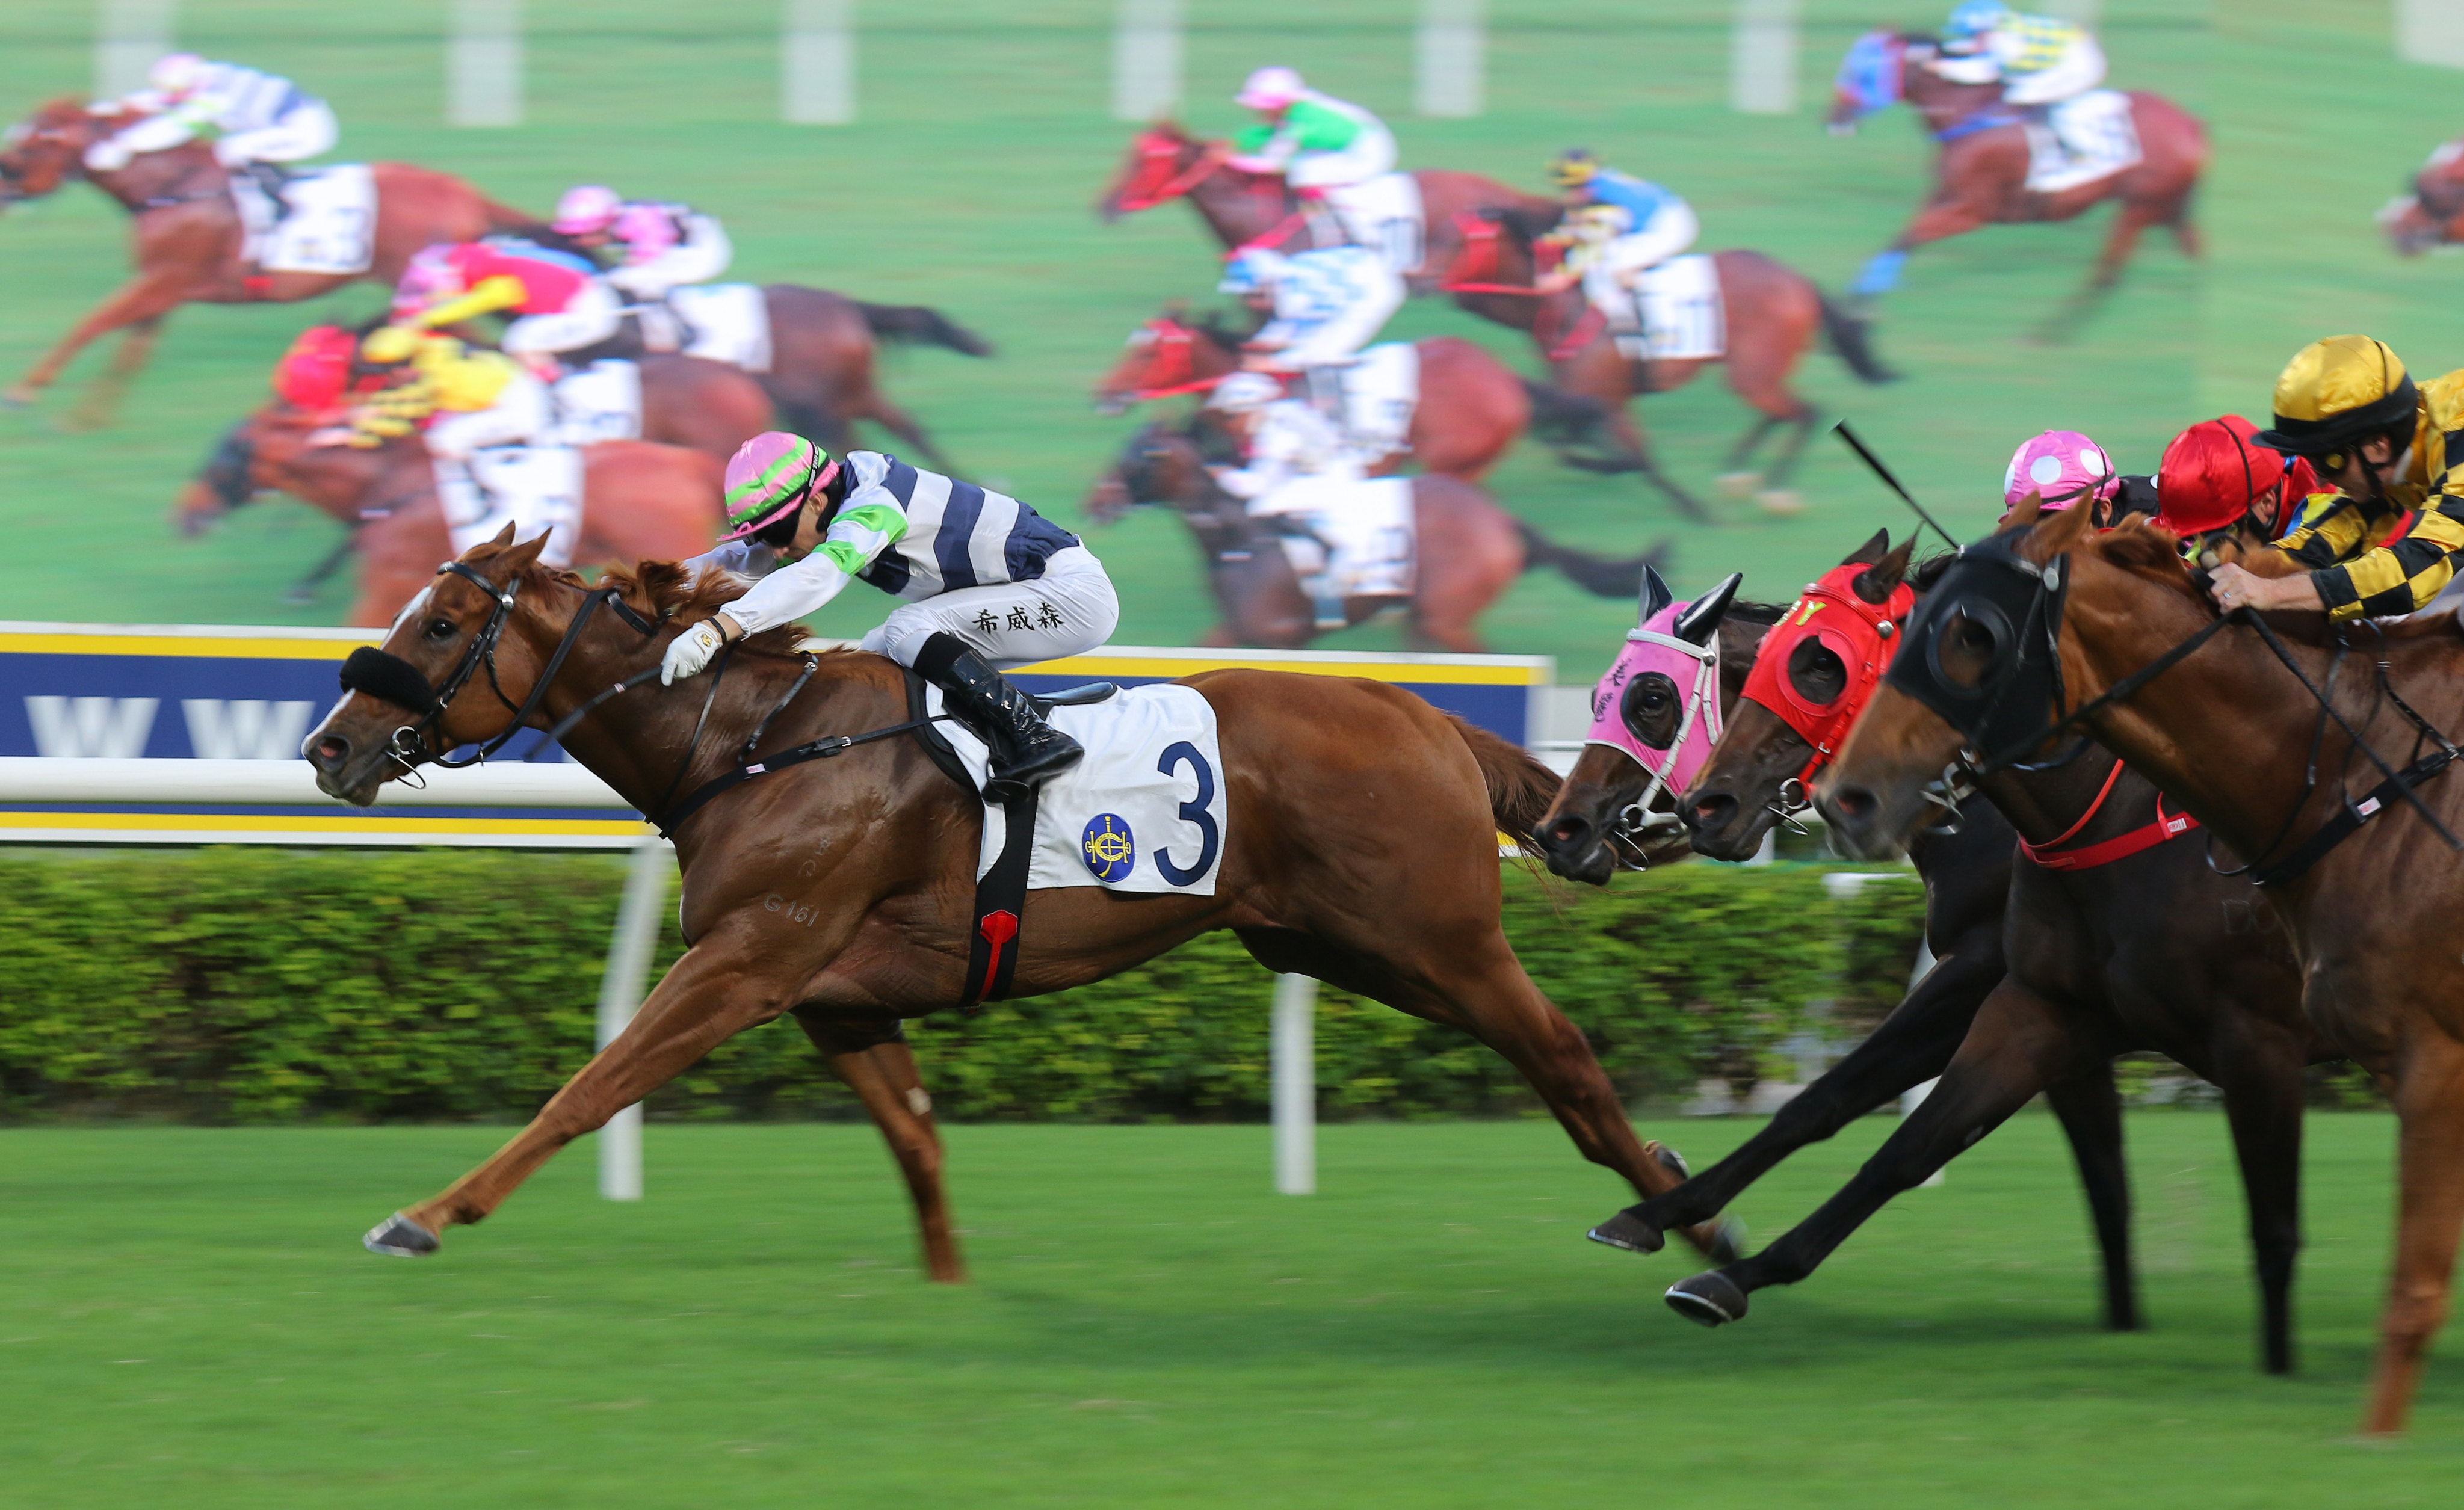 Packing Treadmill delivers under Lyle Hewitson at Sha Tin on Sunday. Photo: Kenneth Chan